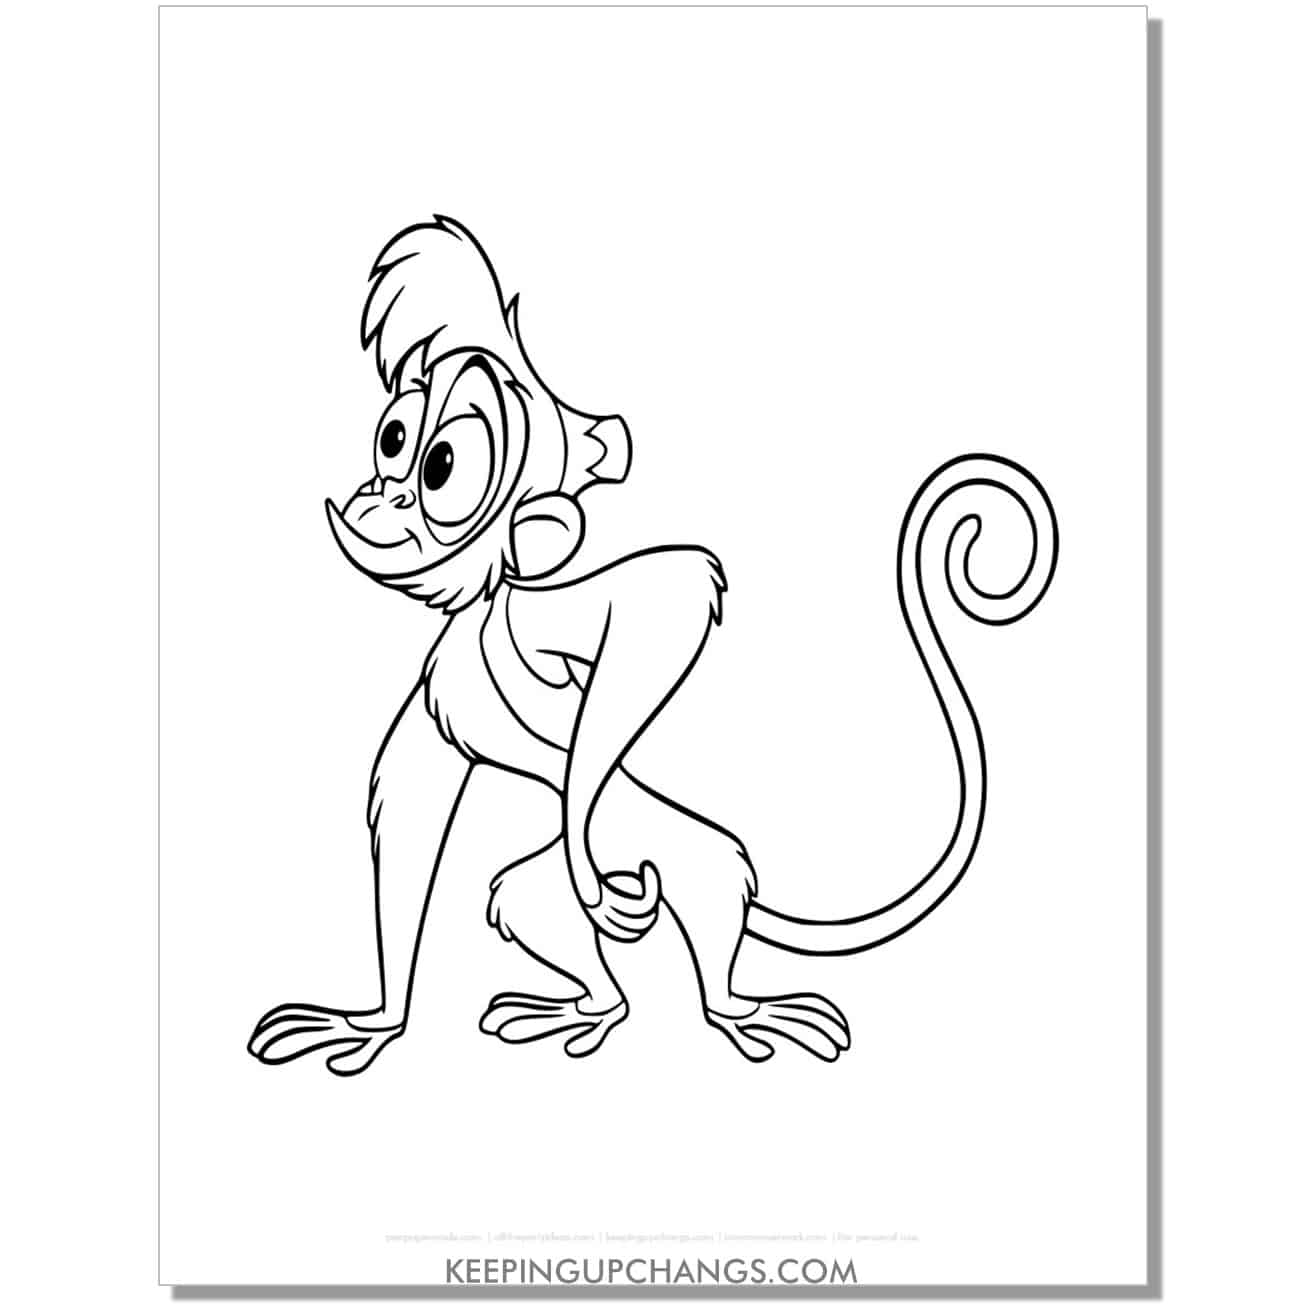 aladdin abu with alert look coloring page, sheet.